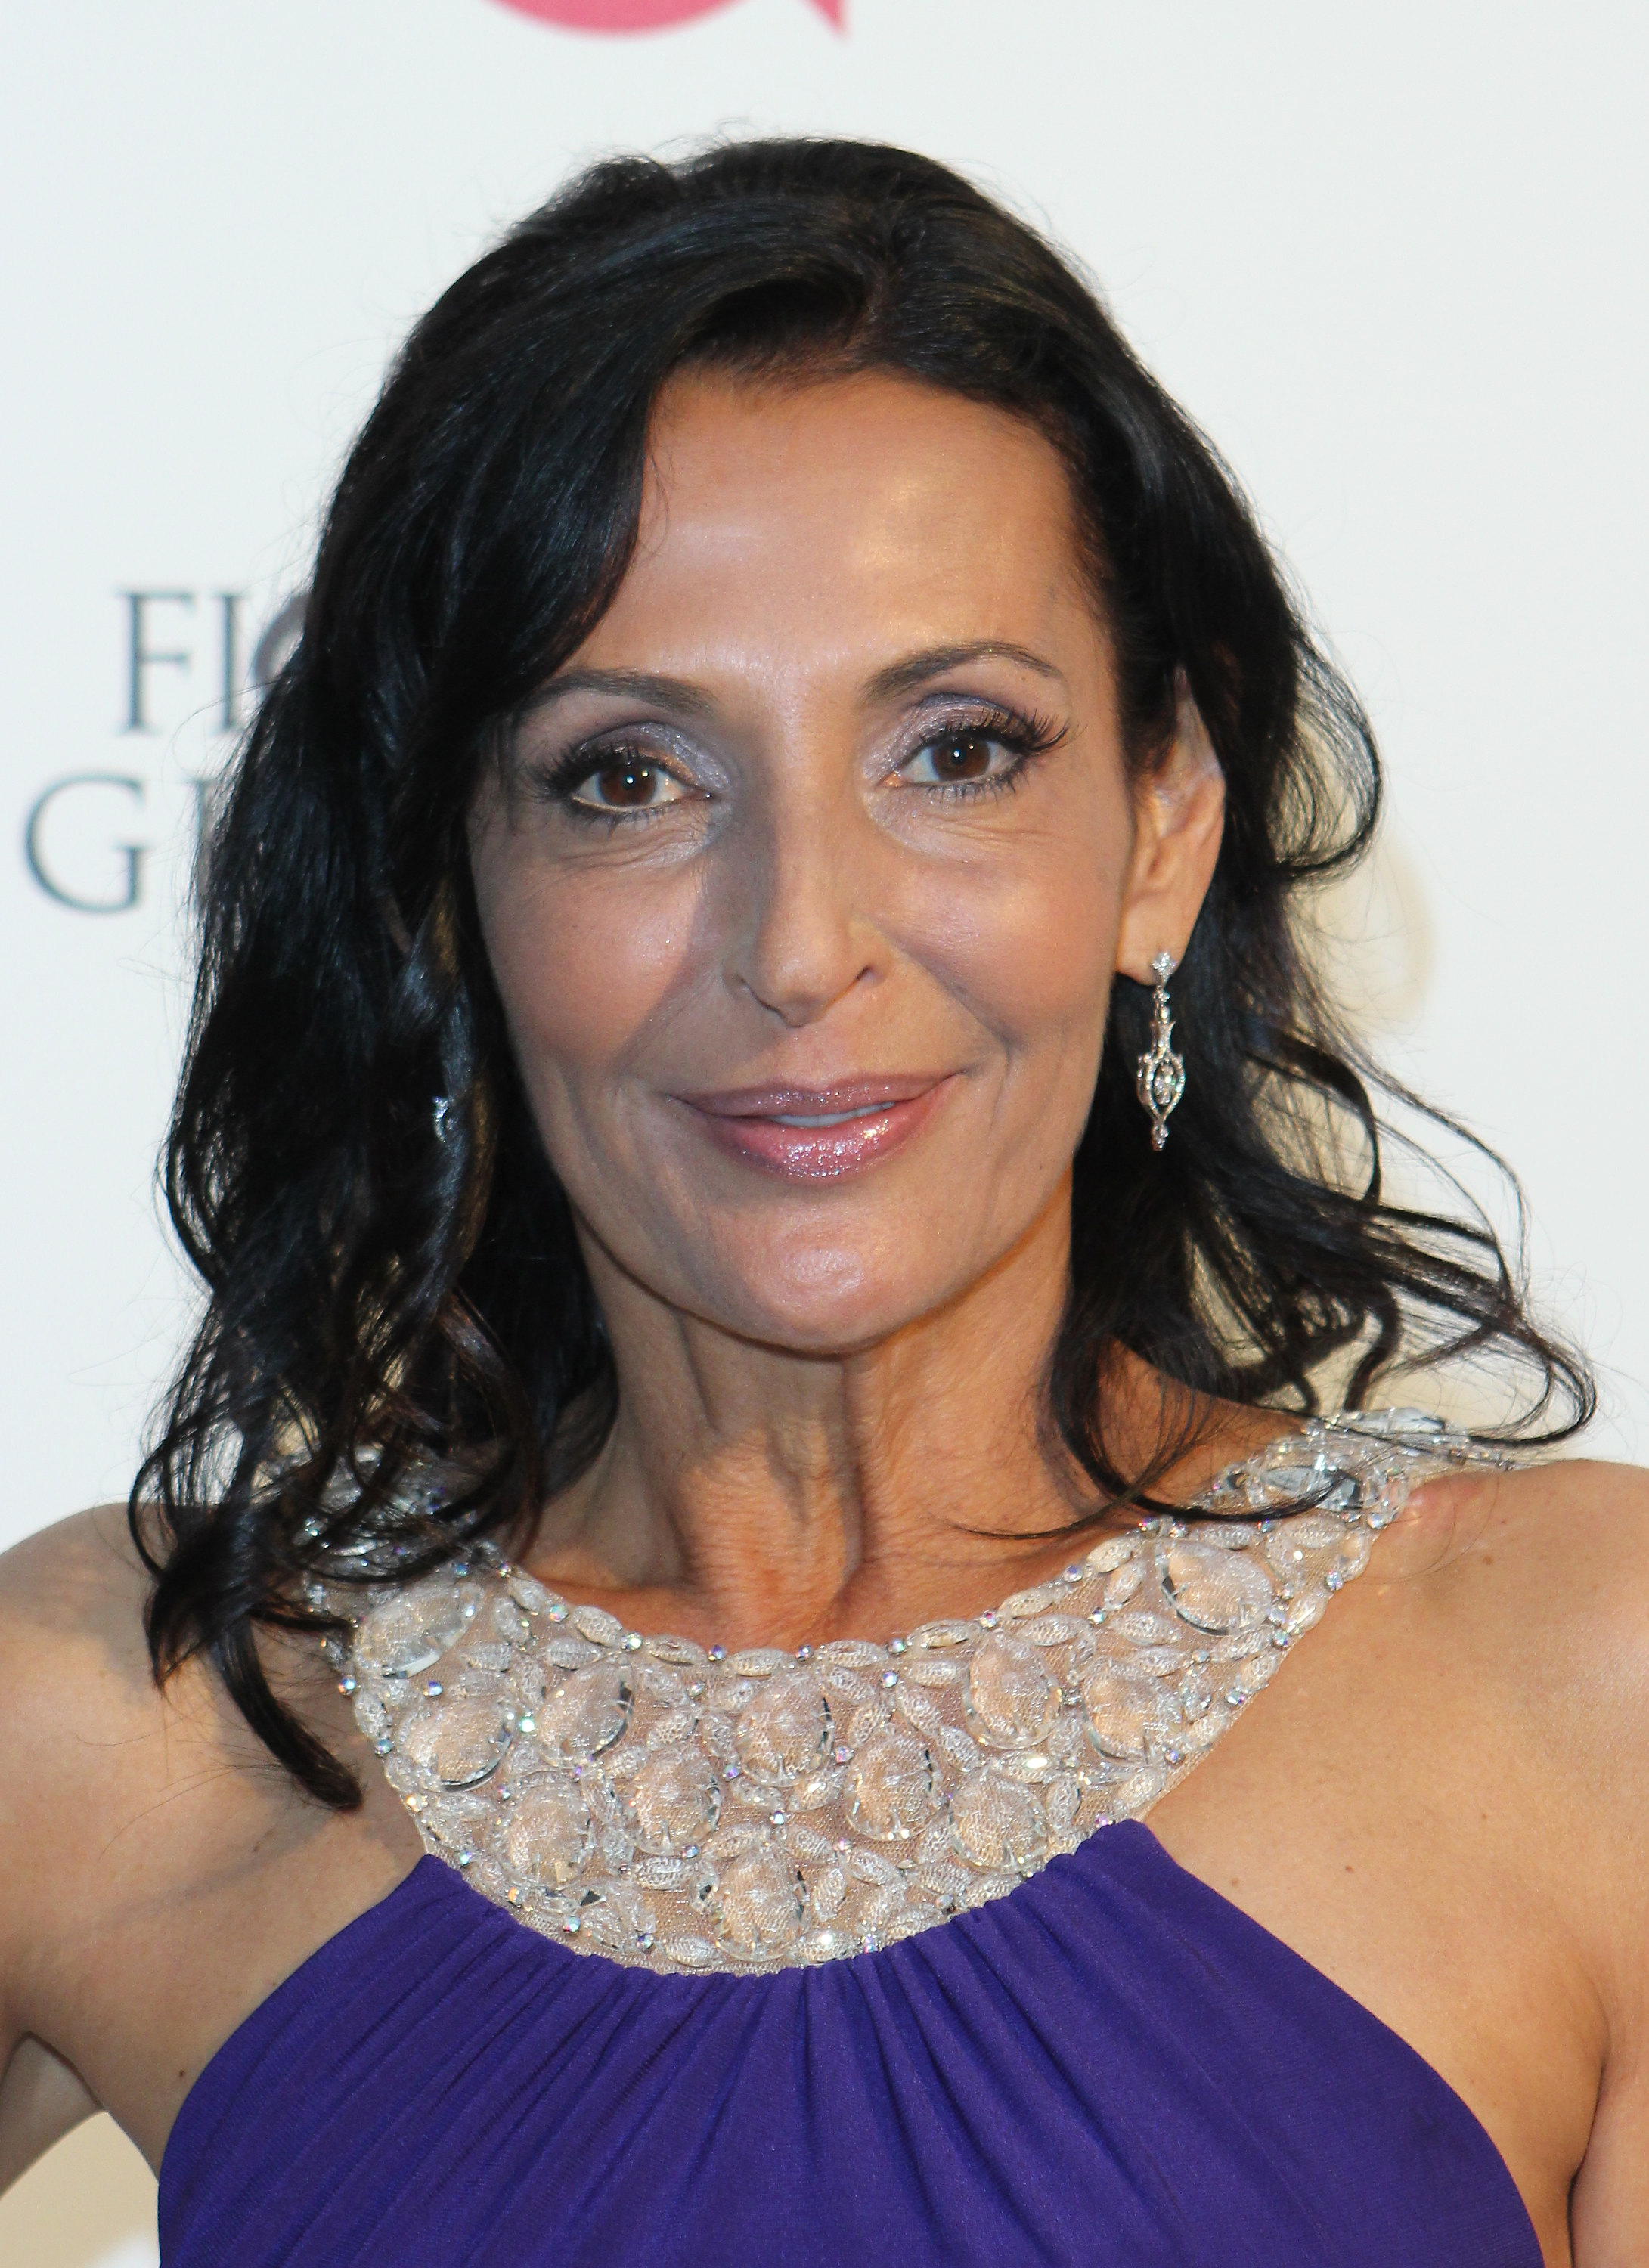 Ghada Dergham attends the 2015 Elton John Academy Award Viewing Party